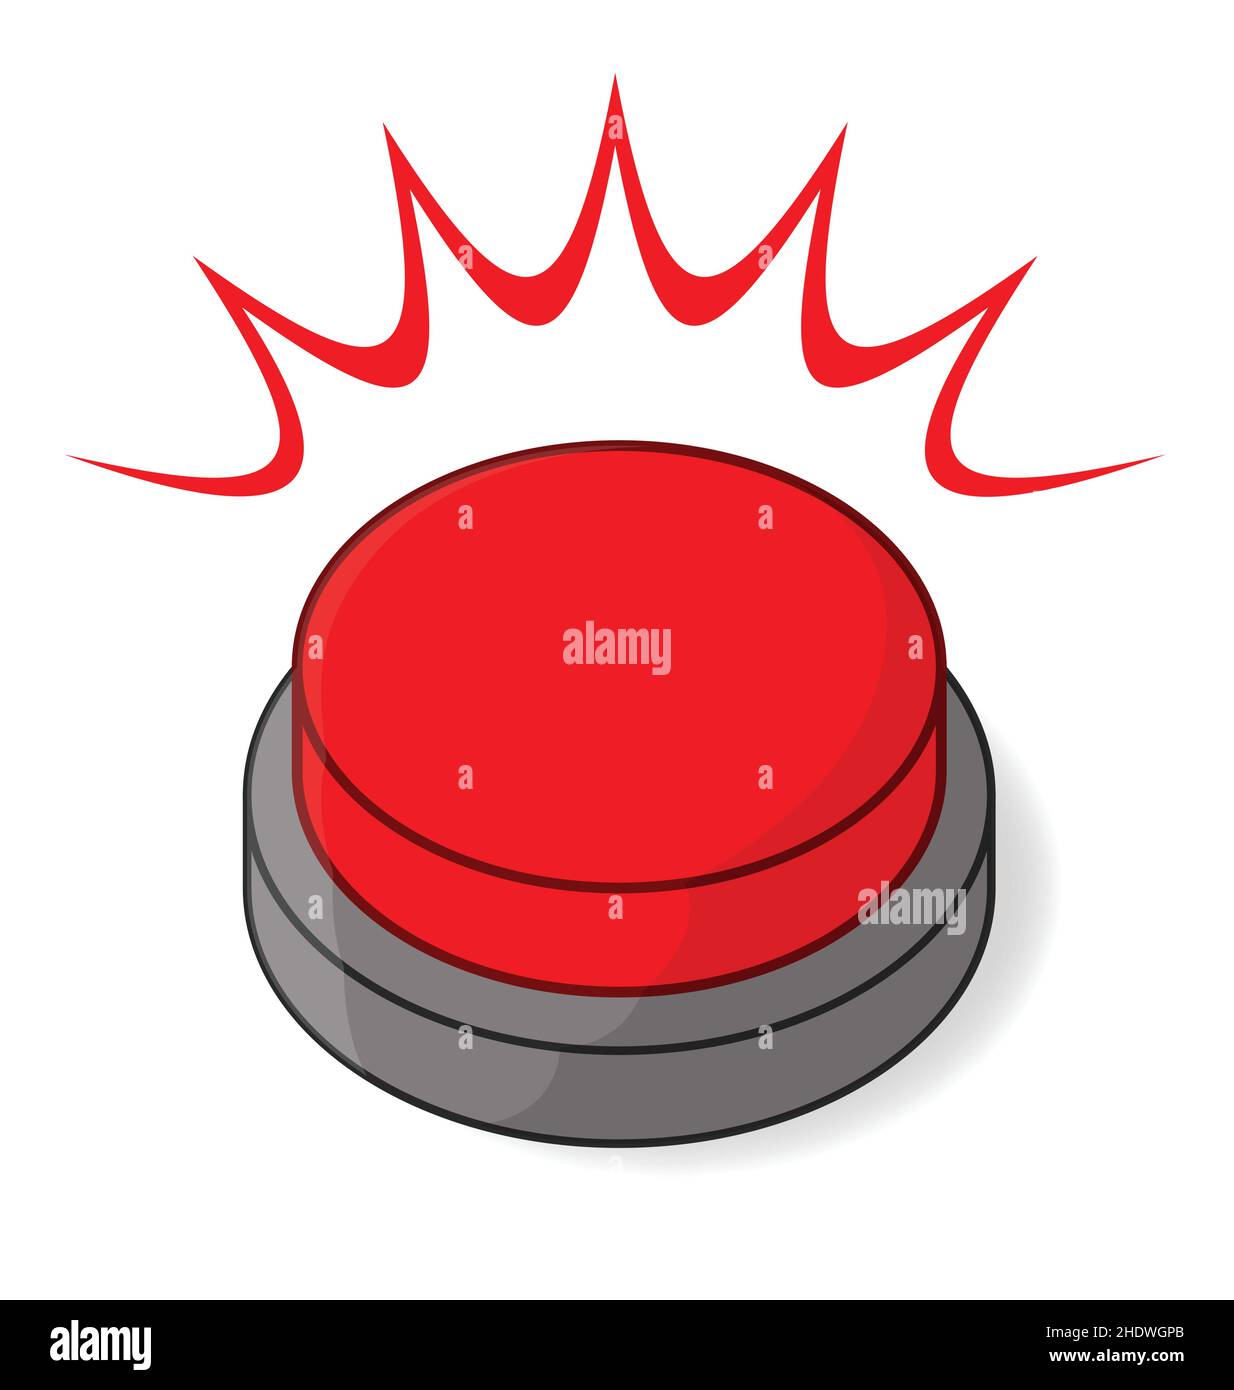 Big red flashing button simple, cartoon image icon isometric view isolated vector on white background Stock Vector